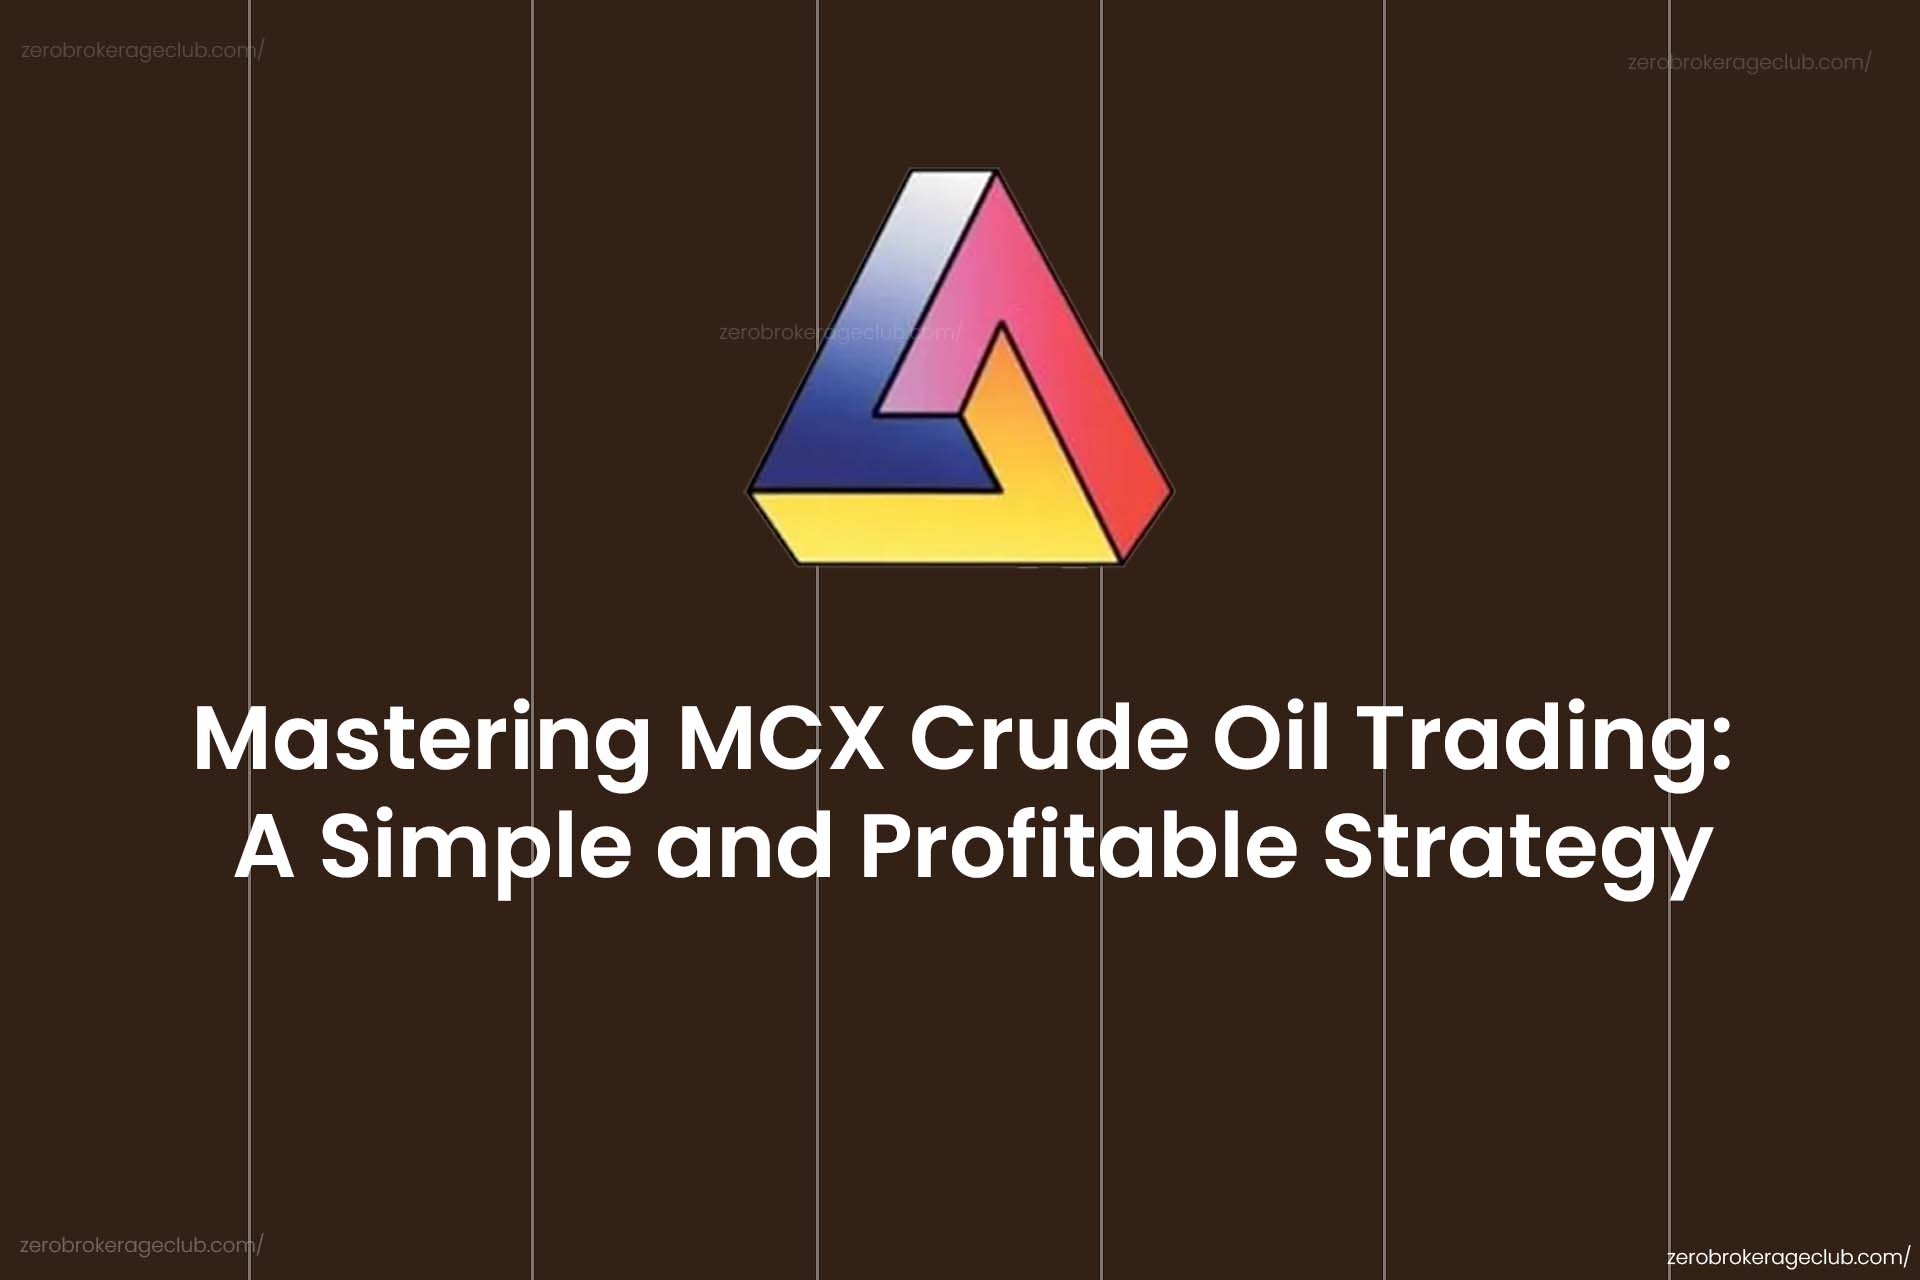 Mastering MCX Crude Oil Trading: A Simple and Profitable Strategy